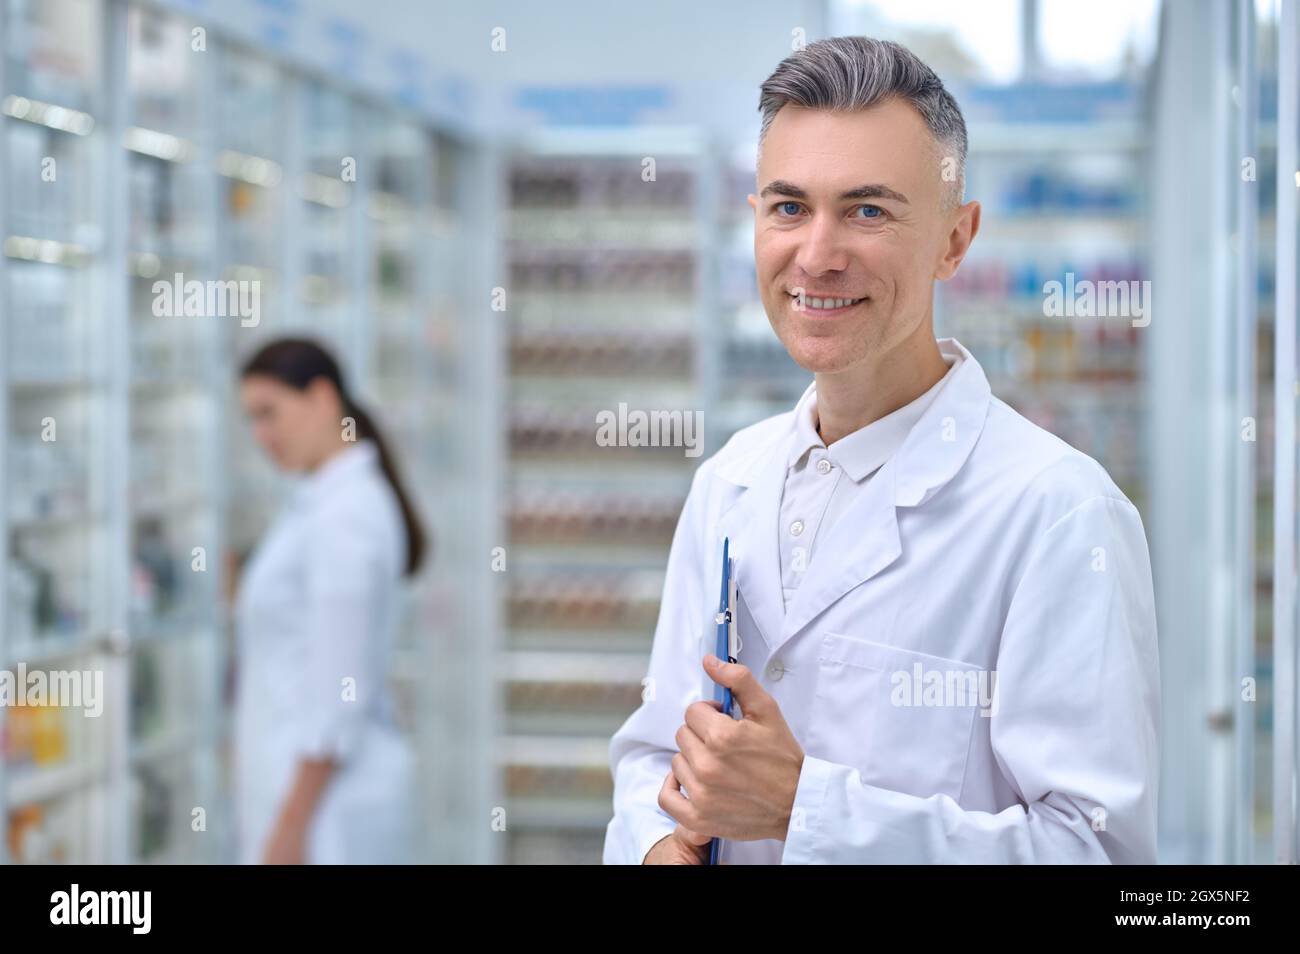 Smiling pharmacist with folder and woman behind Stock Photo